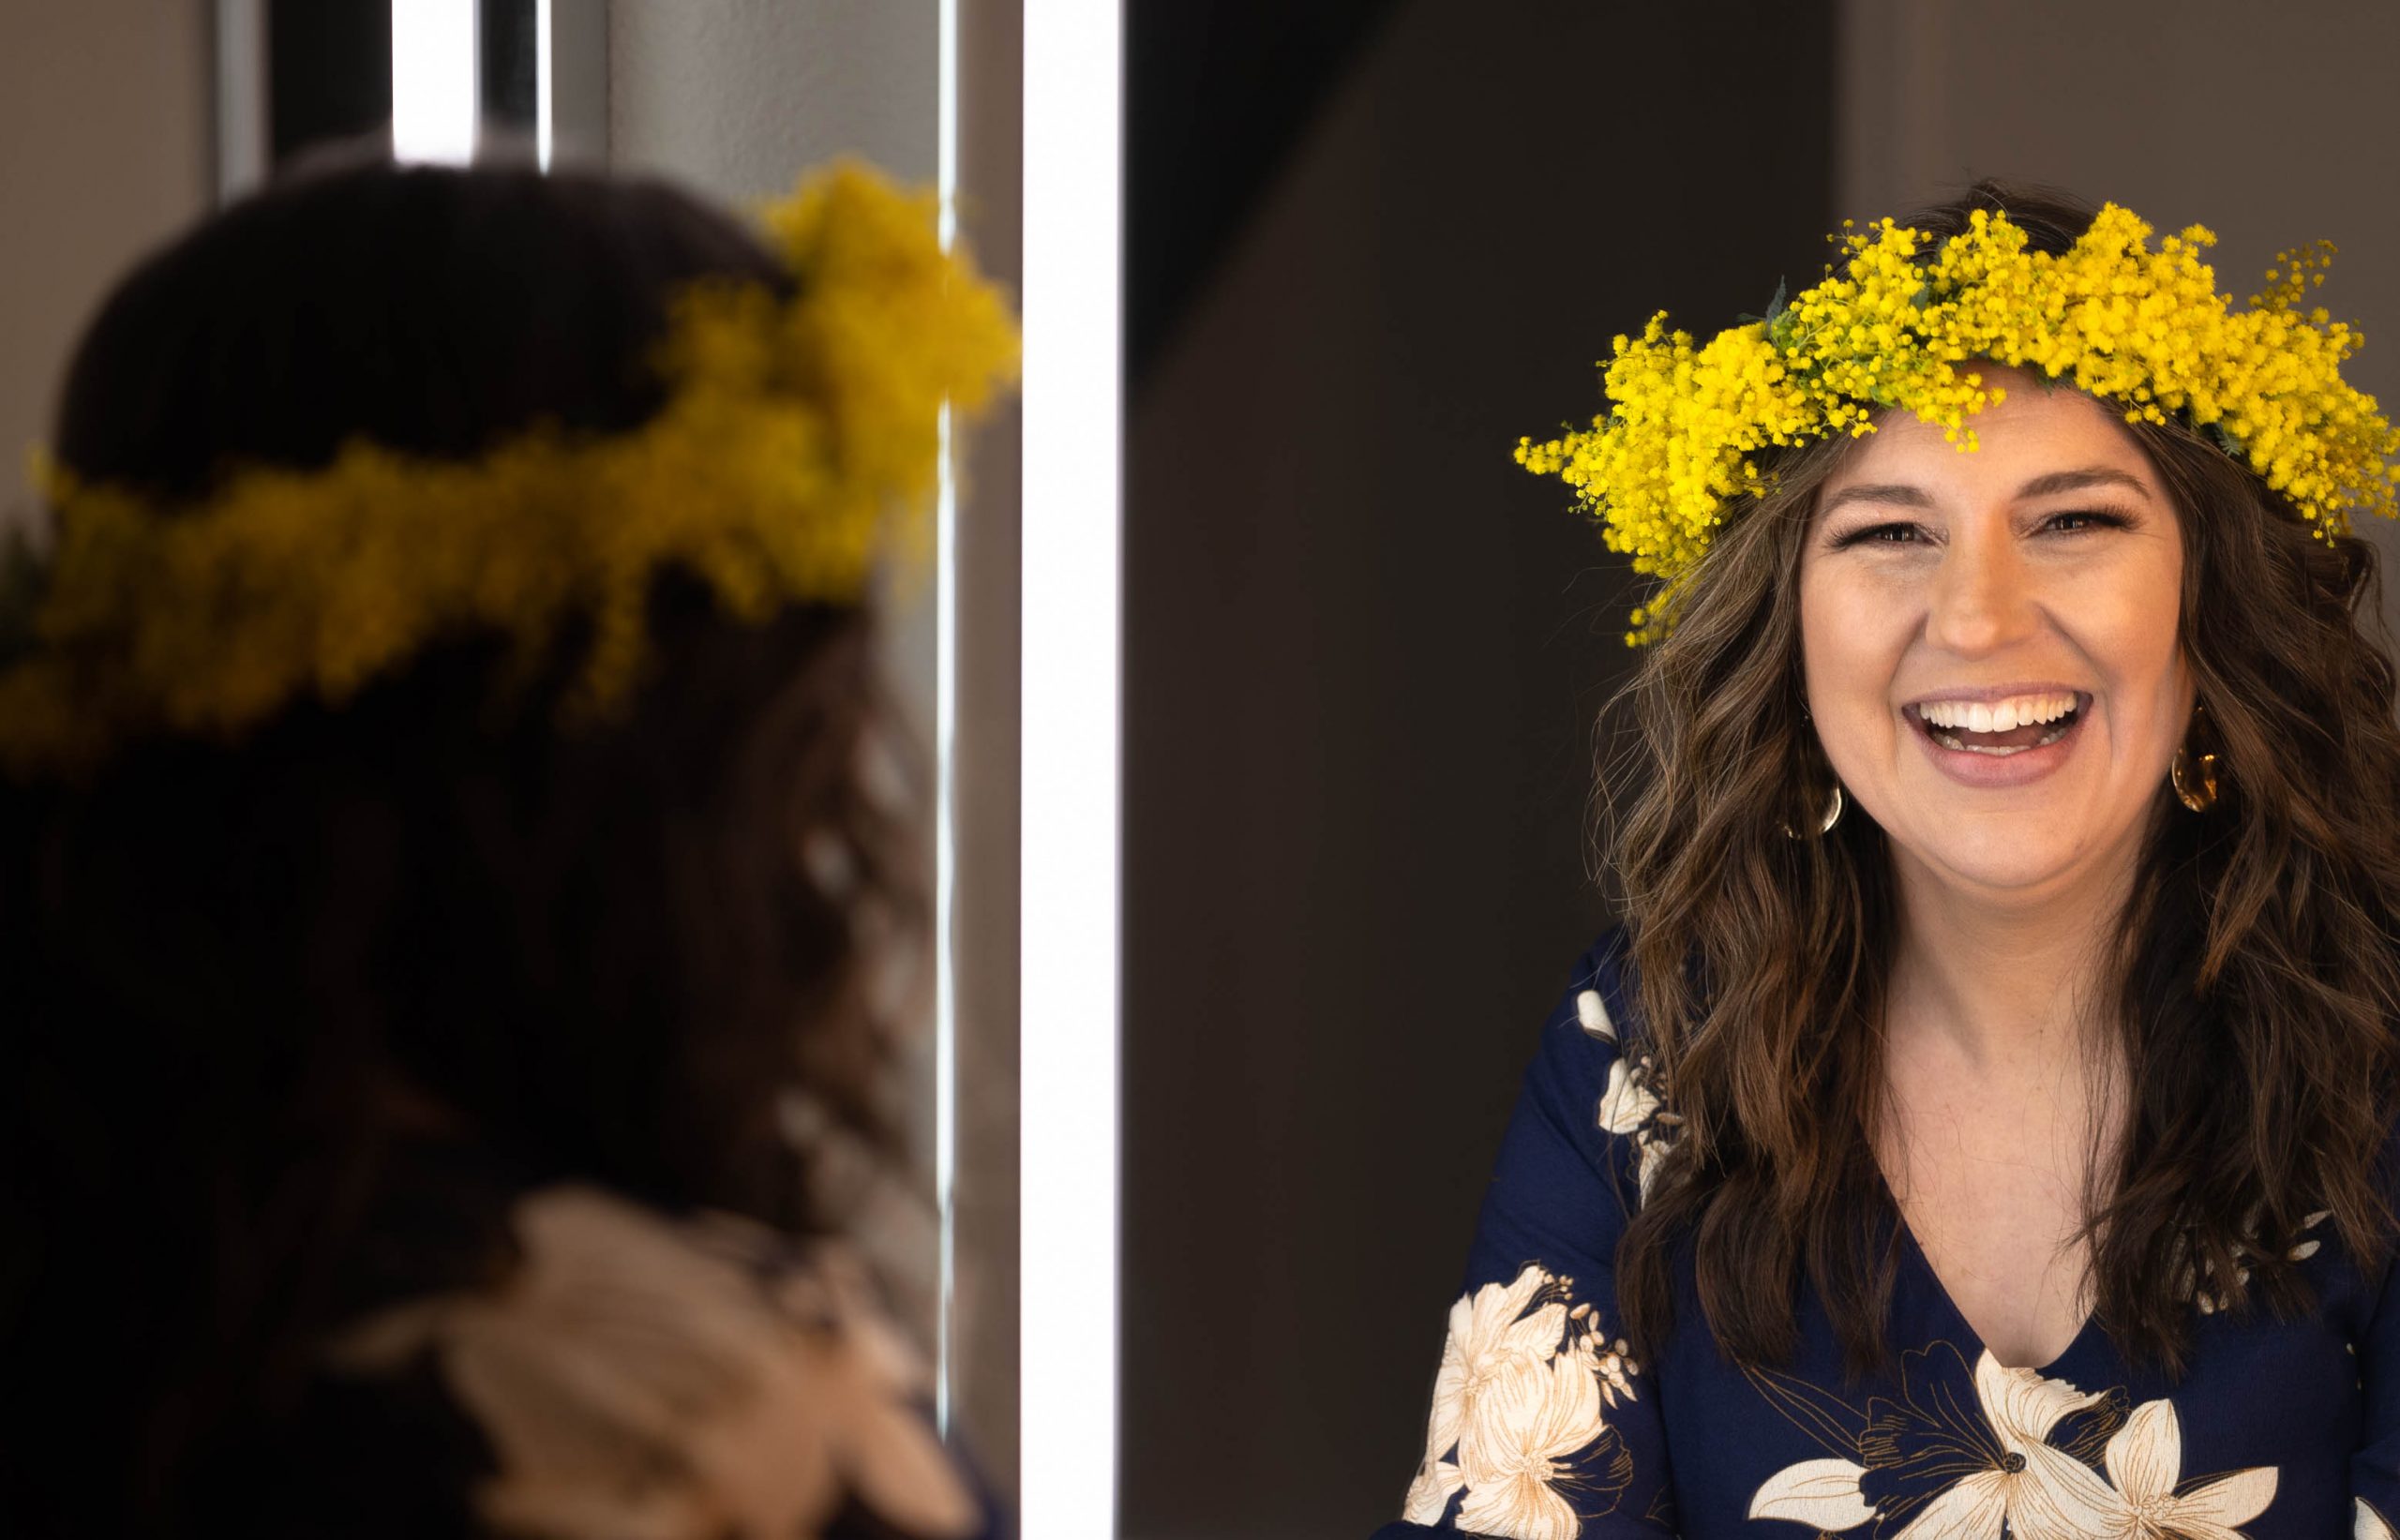 Rebecca Grant wearing a yellow flower crown